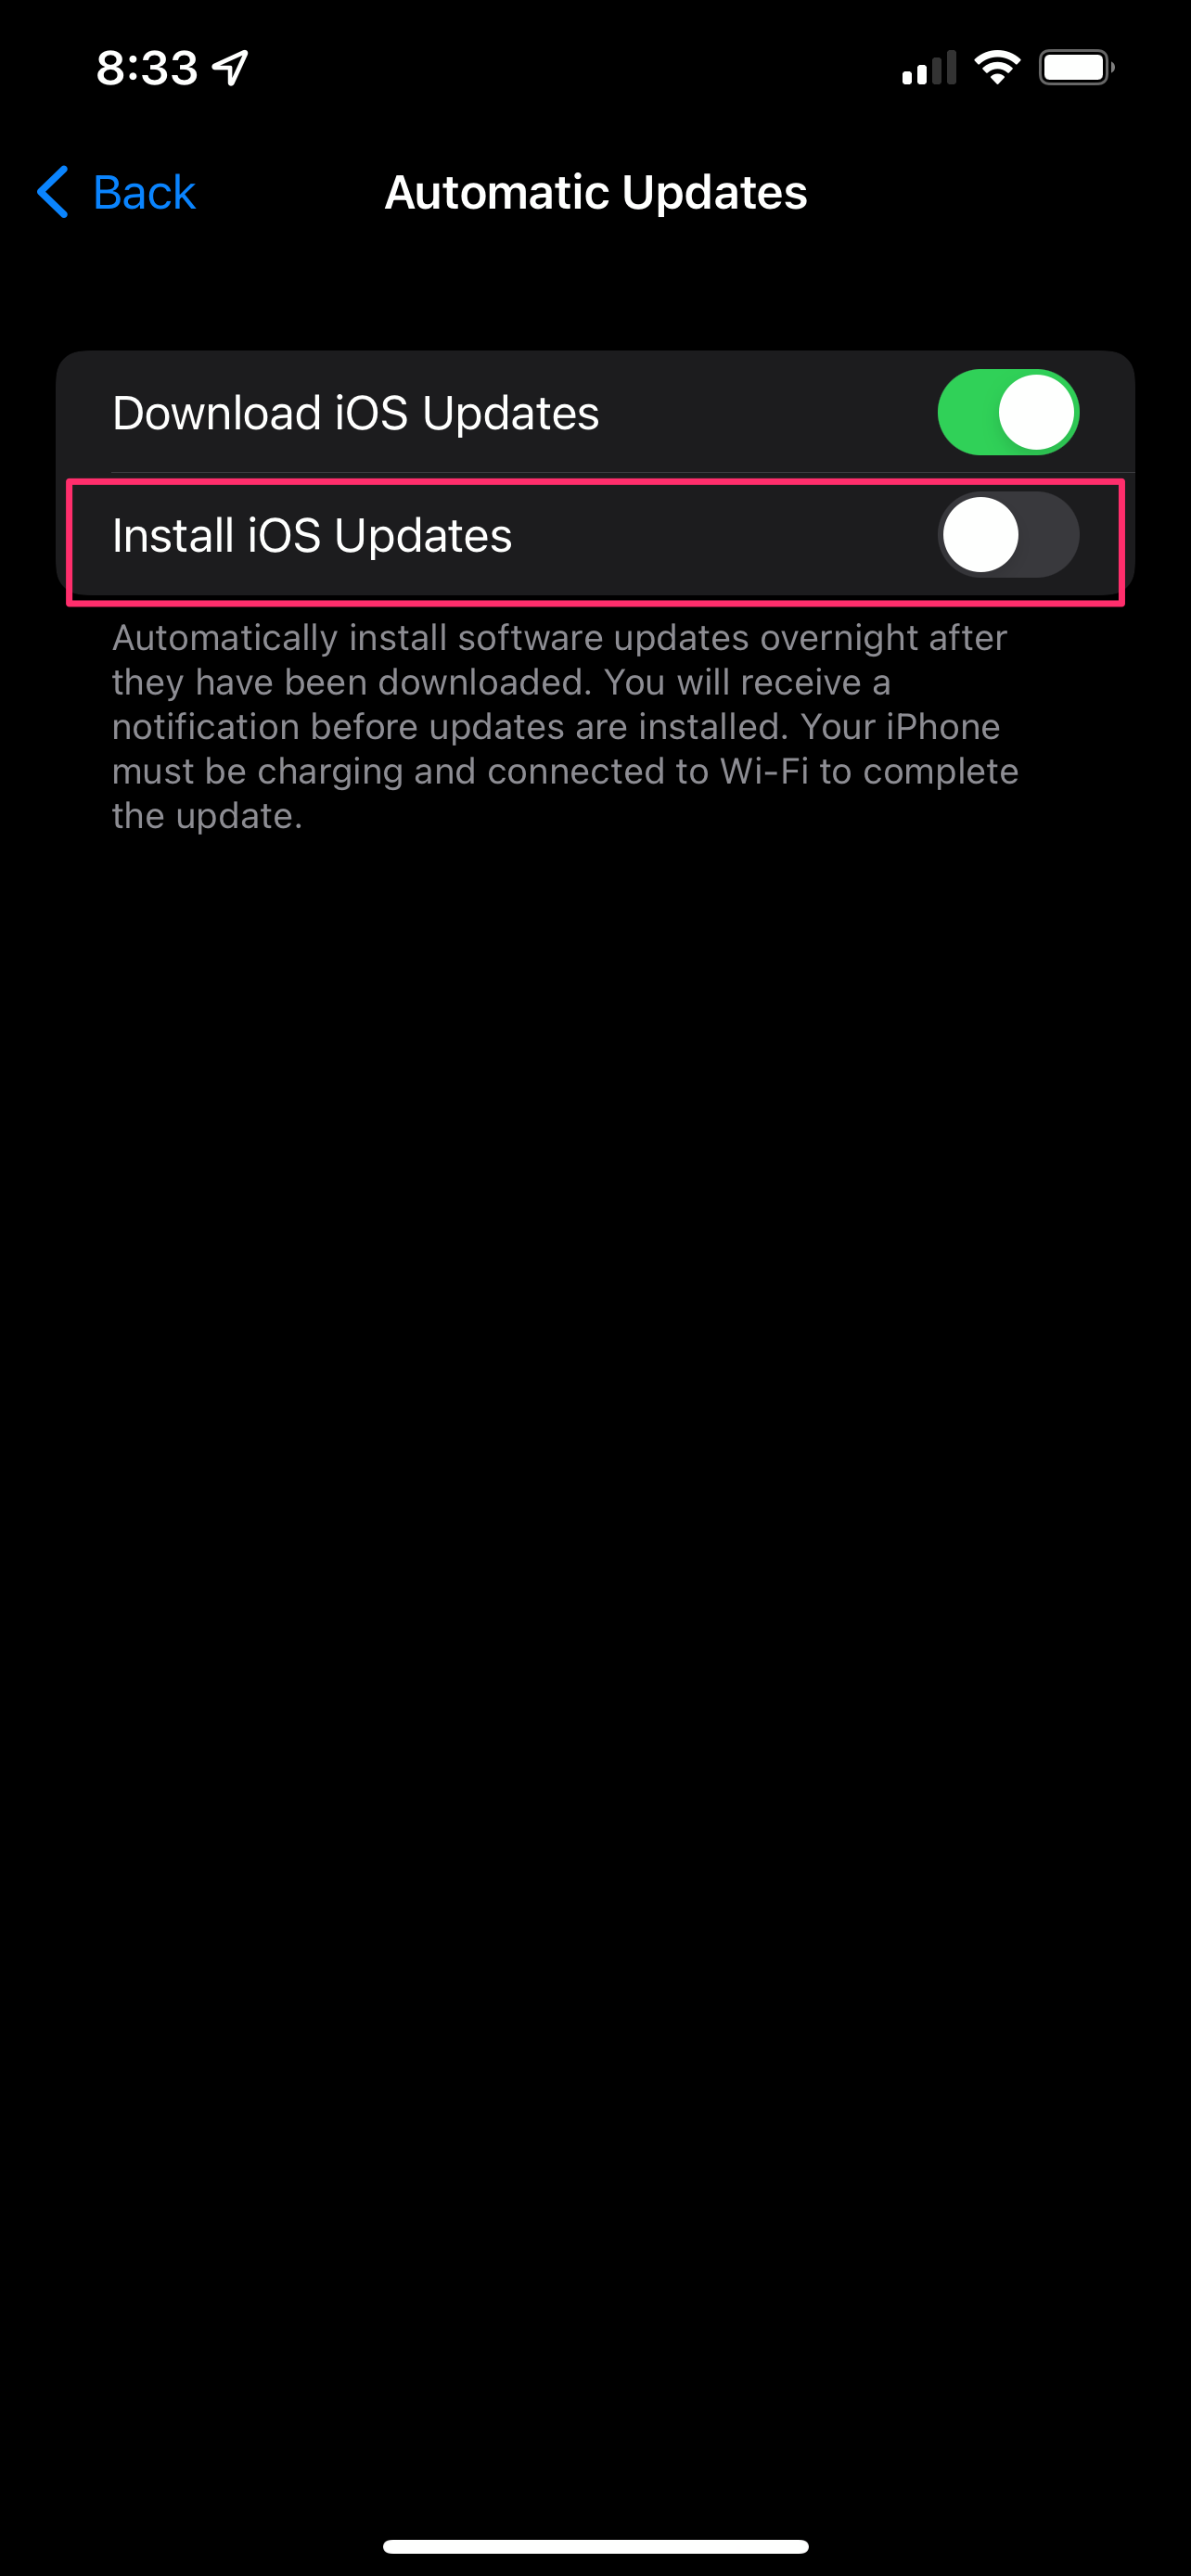 Turn off the iOS Updates toggle in order to stop the automatic installation of updates.